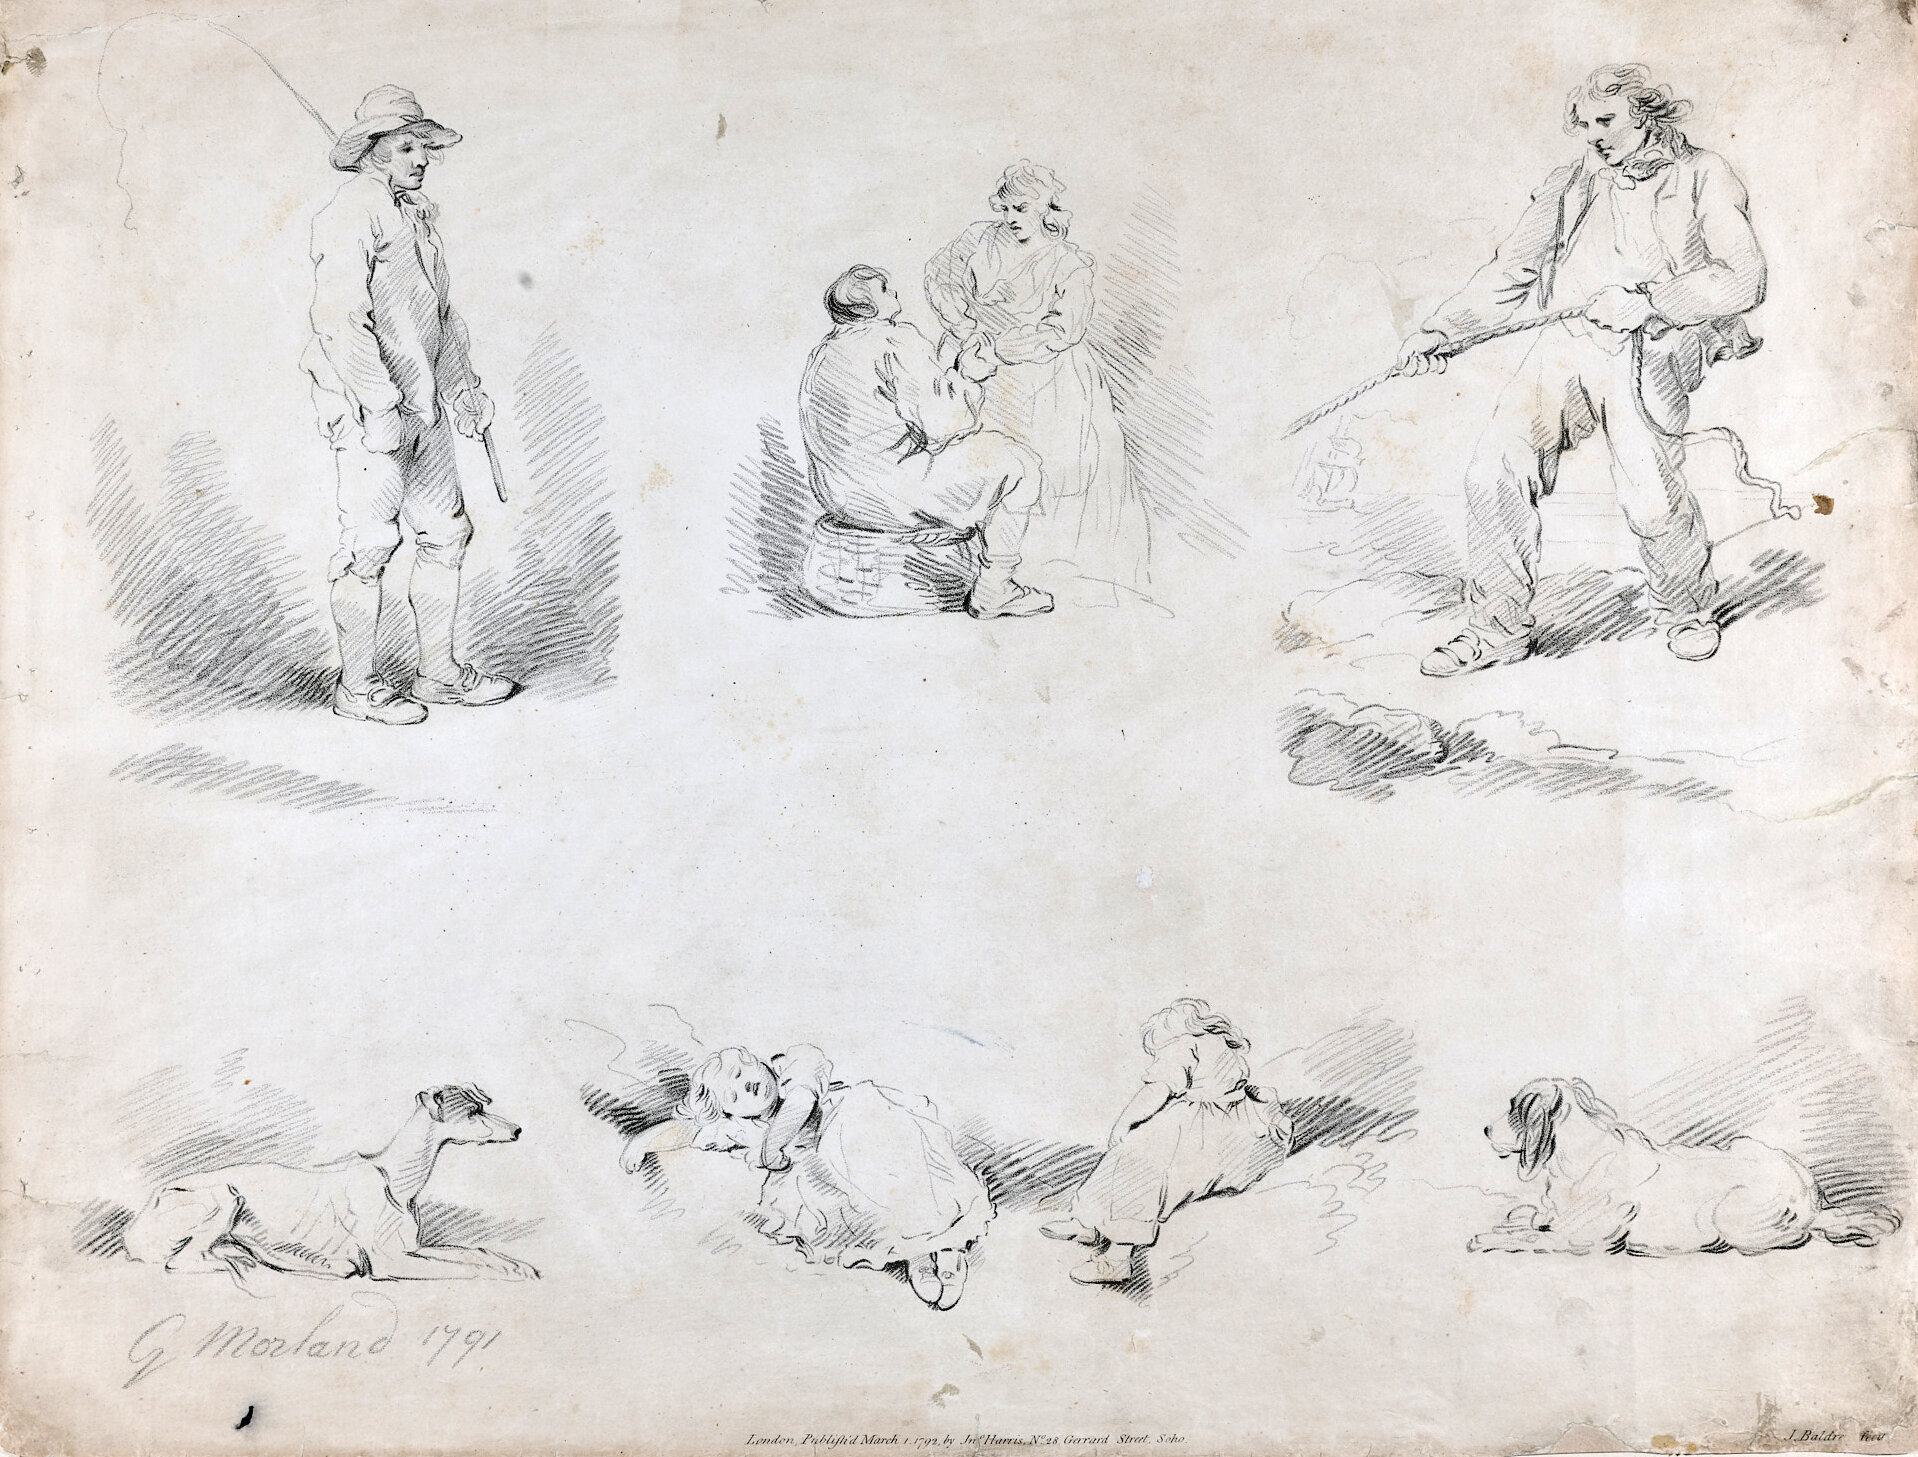   George Morland (1763-1804)  Sketches   Crayon-manner etching, 1791 The Noble Maritime Collection  Gift of Barnett Shepherd  